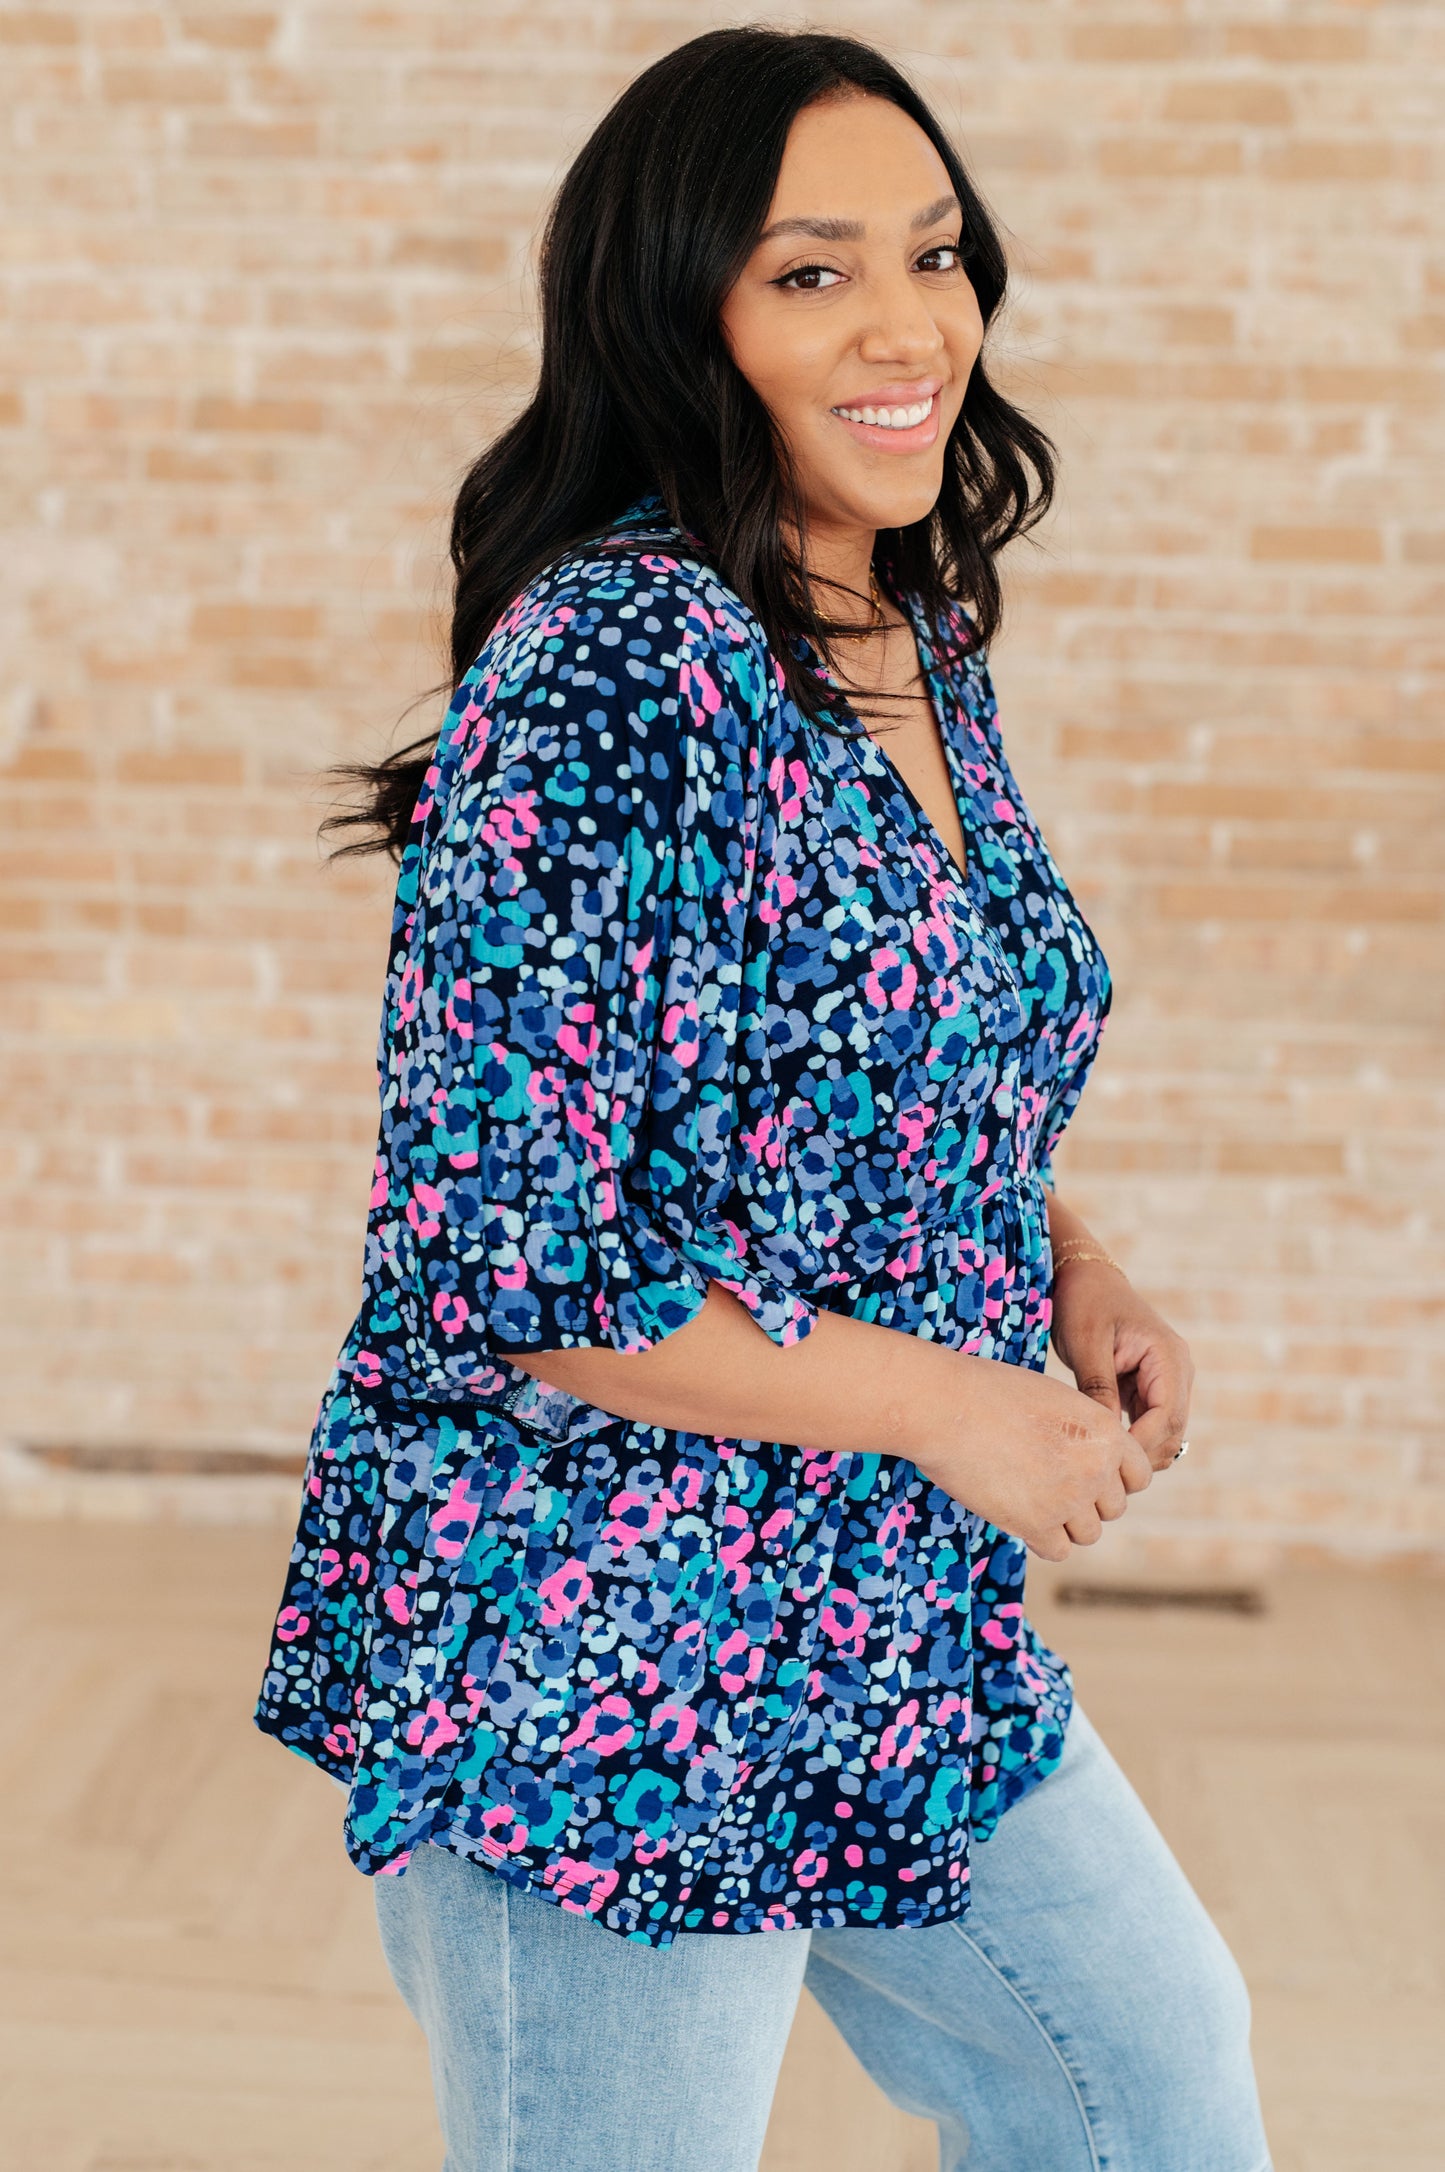 Dreamer Peplum Top in Navy and Lavender Animal Print - Southern Divas Boutique